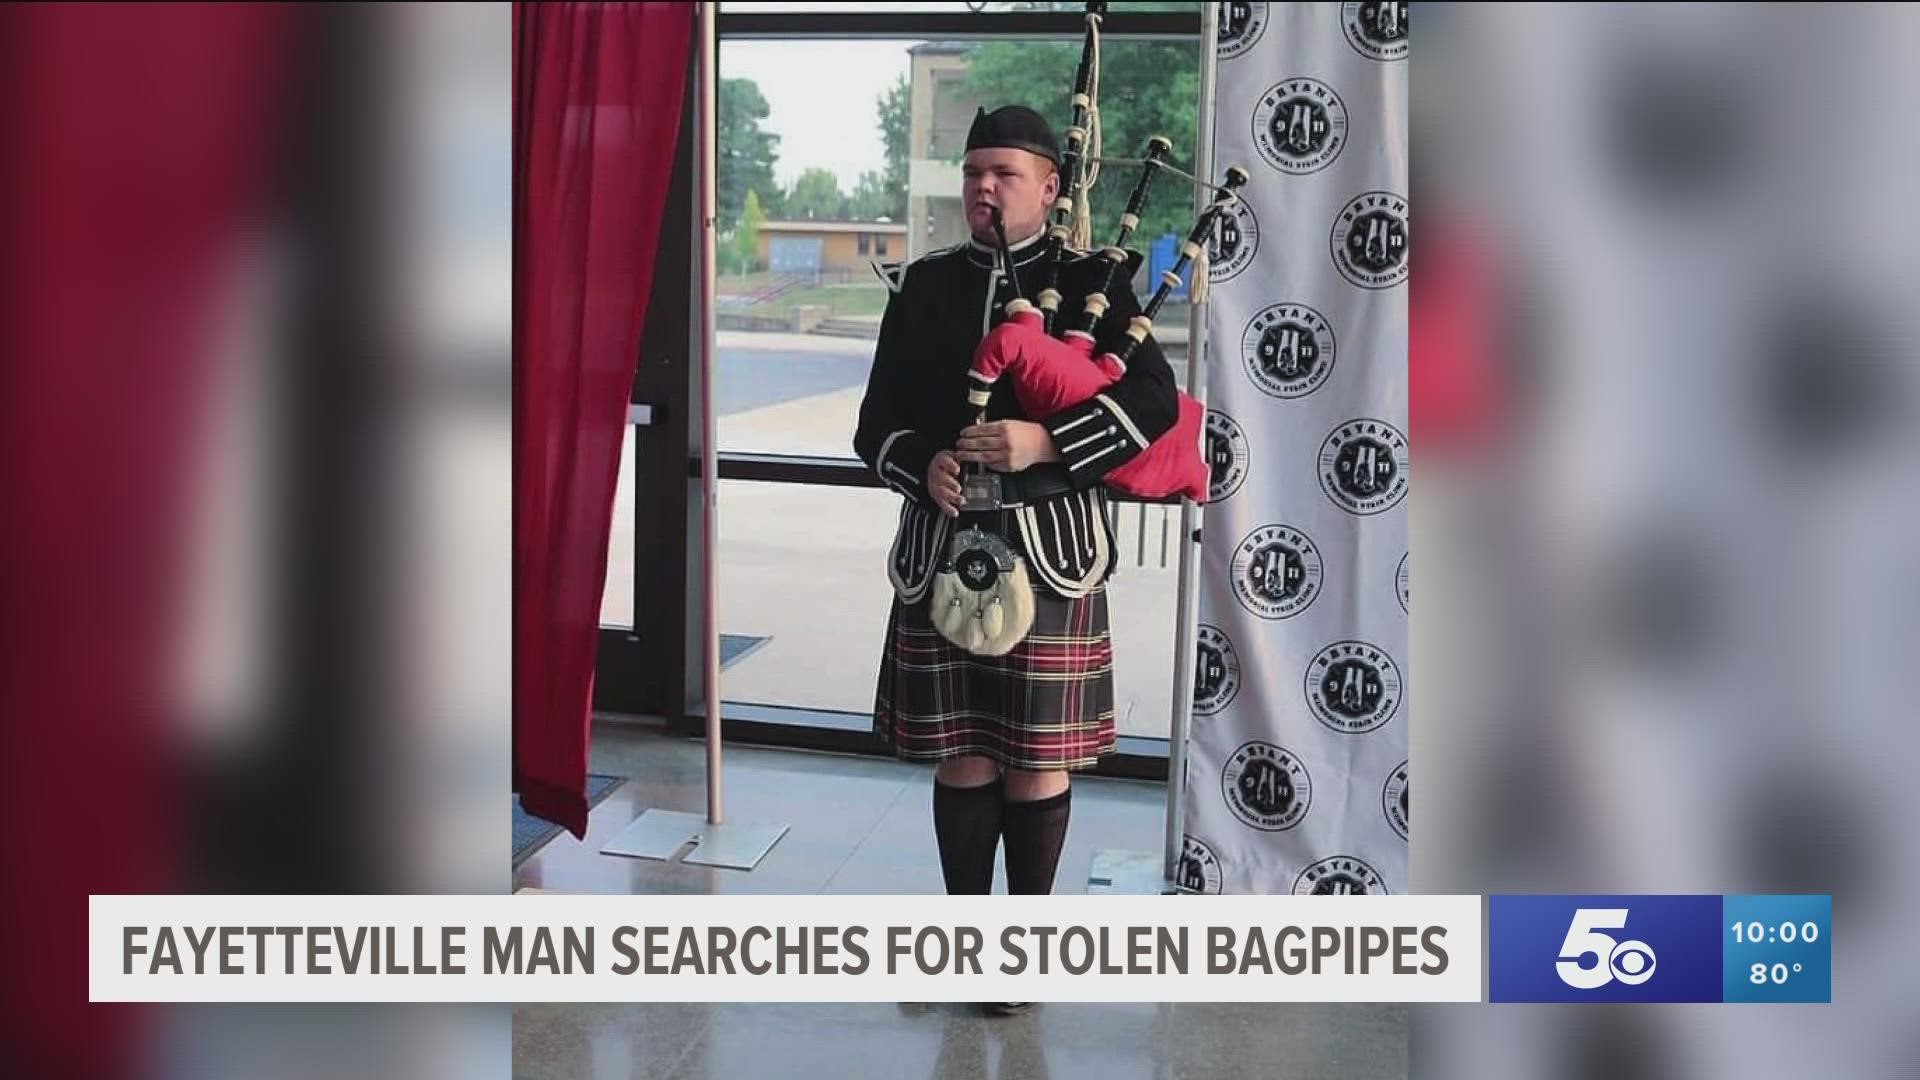 If you visit the Fayetteville square often, Devin Topf can usually be seen playing his bagpipes, unfortunately, the music may be on pause for now.